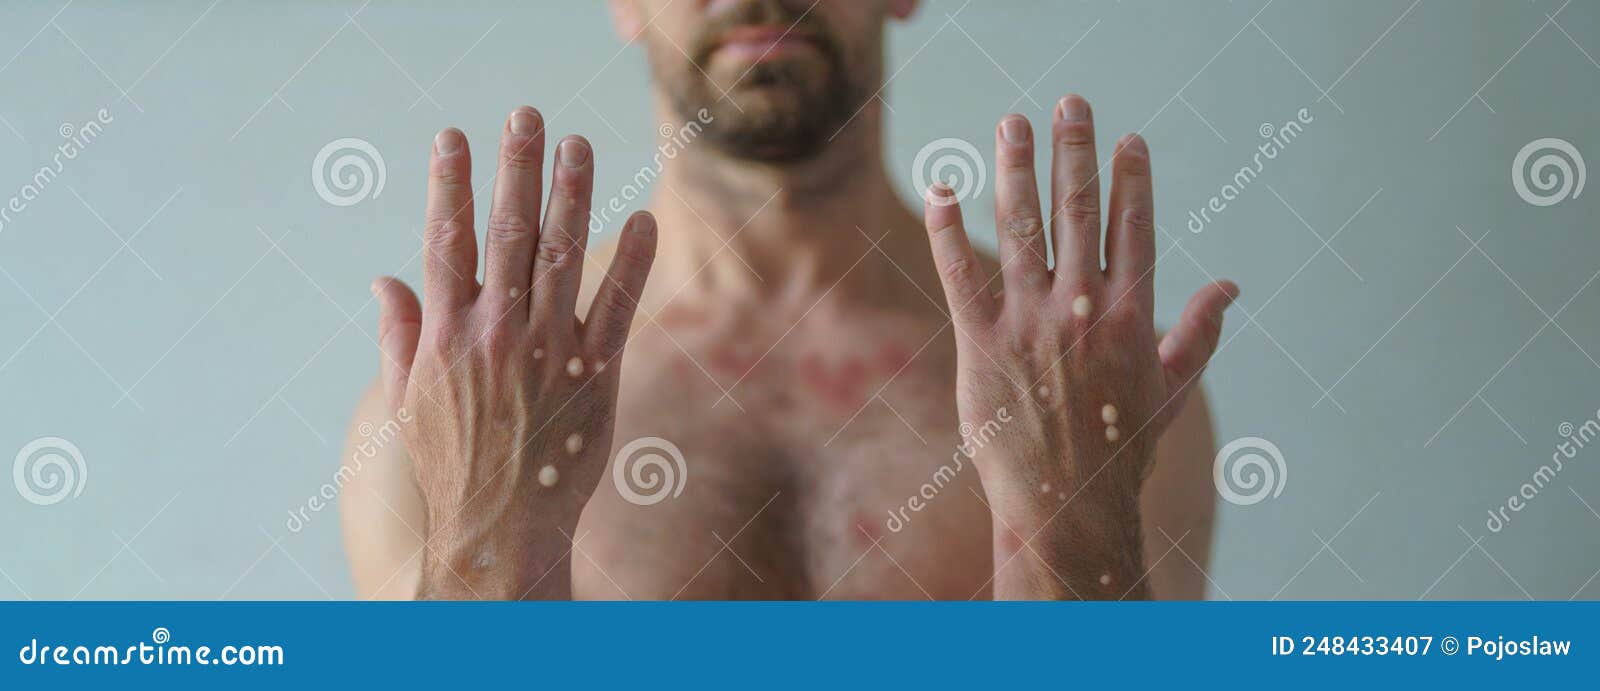 male hands affected by blistering rash because of monkeypox or other viral infection on white background